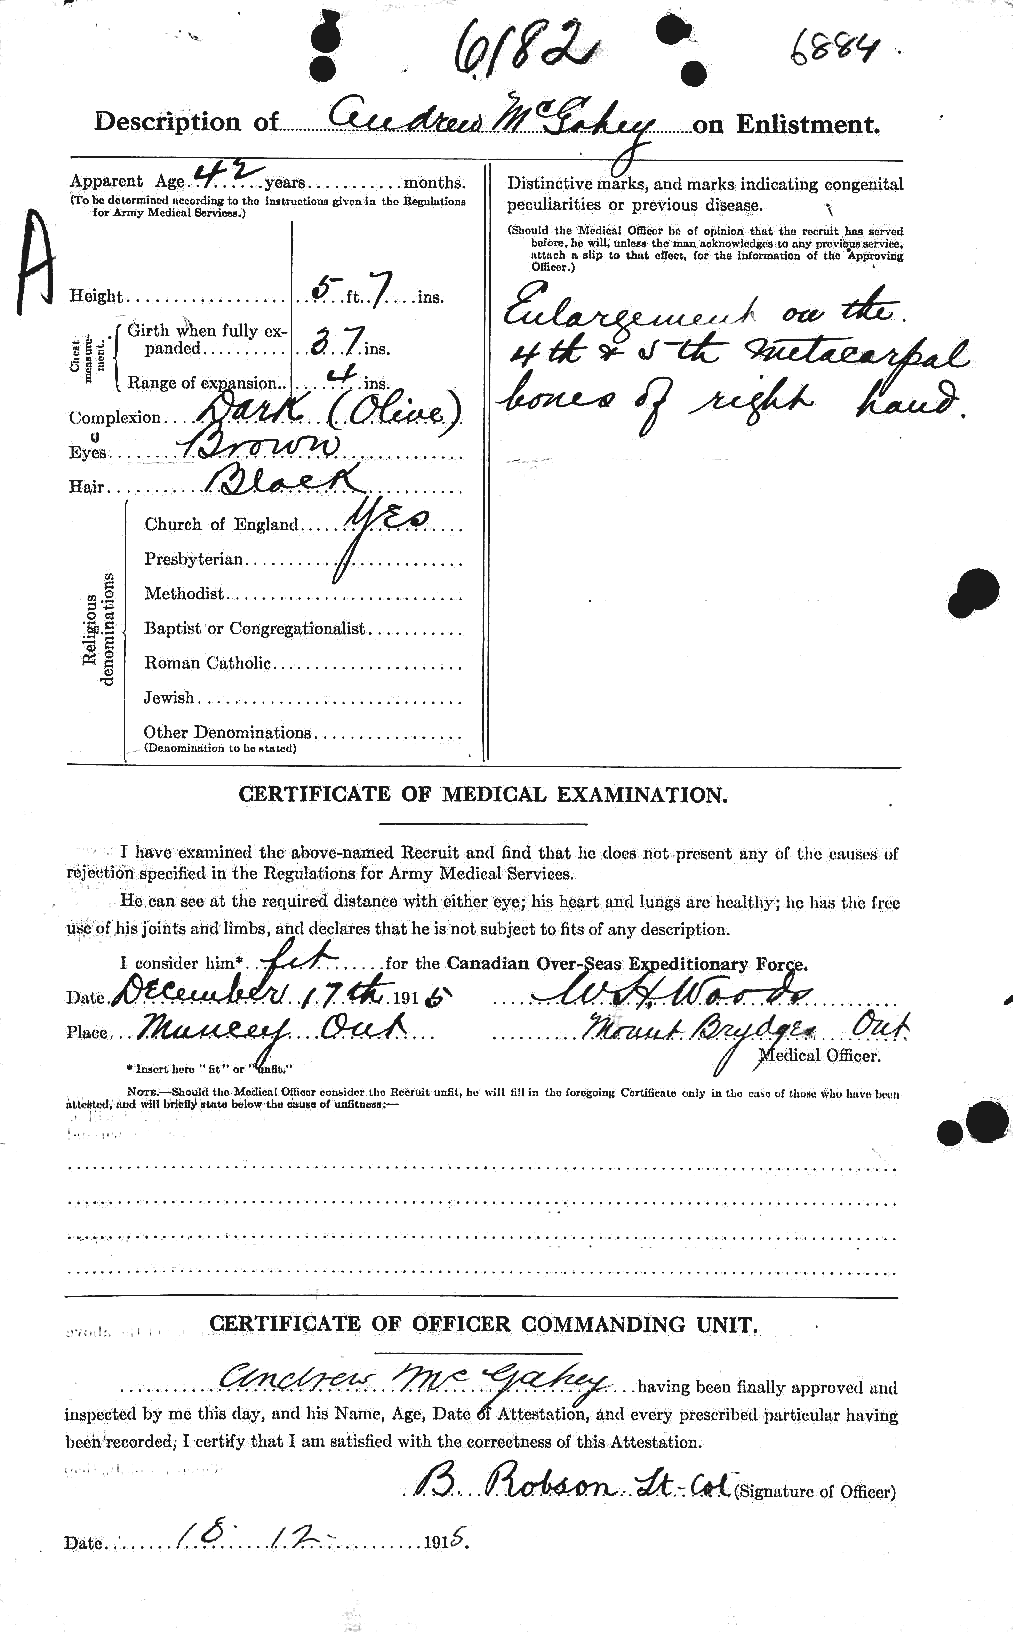 Personnel Records of the First World War - CEF 522653b